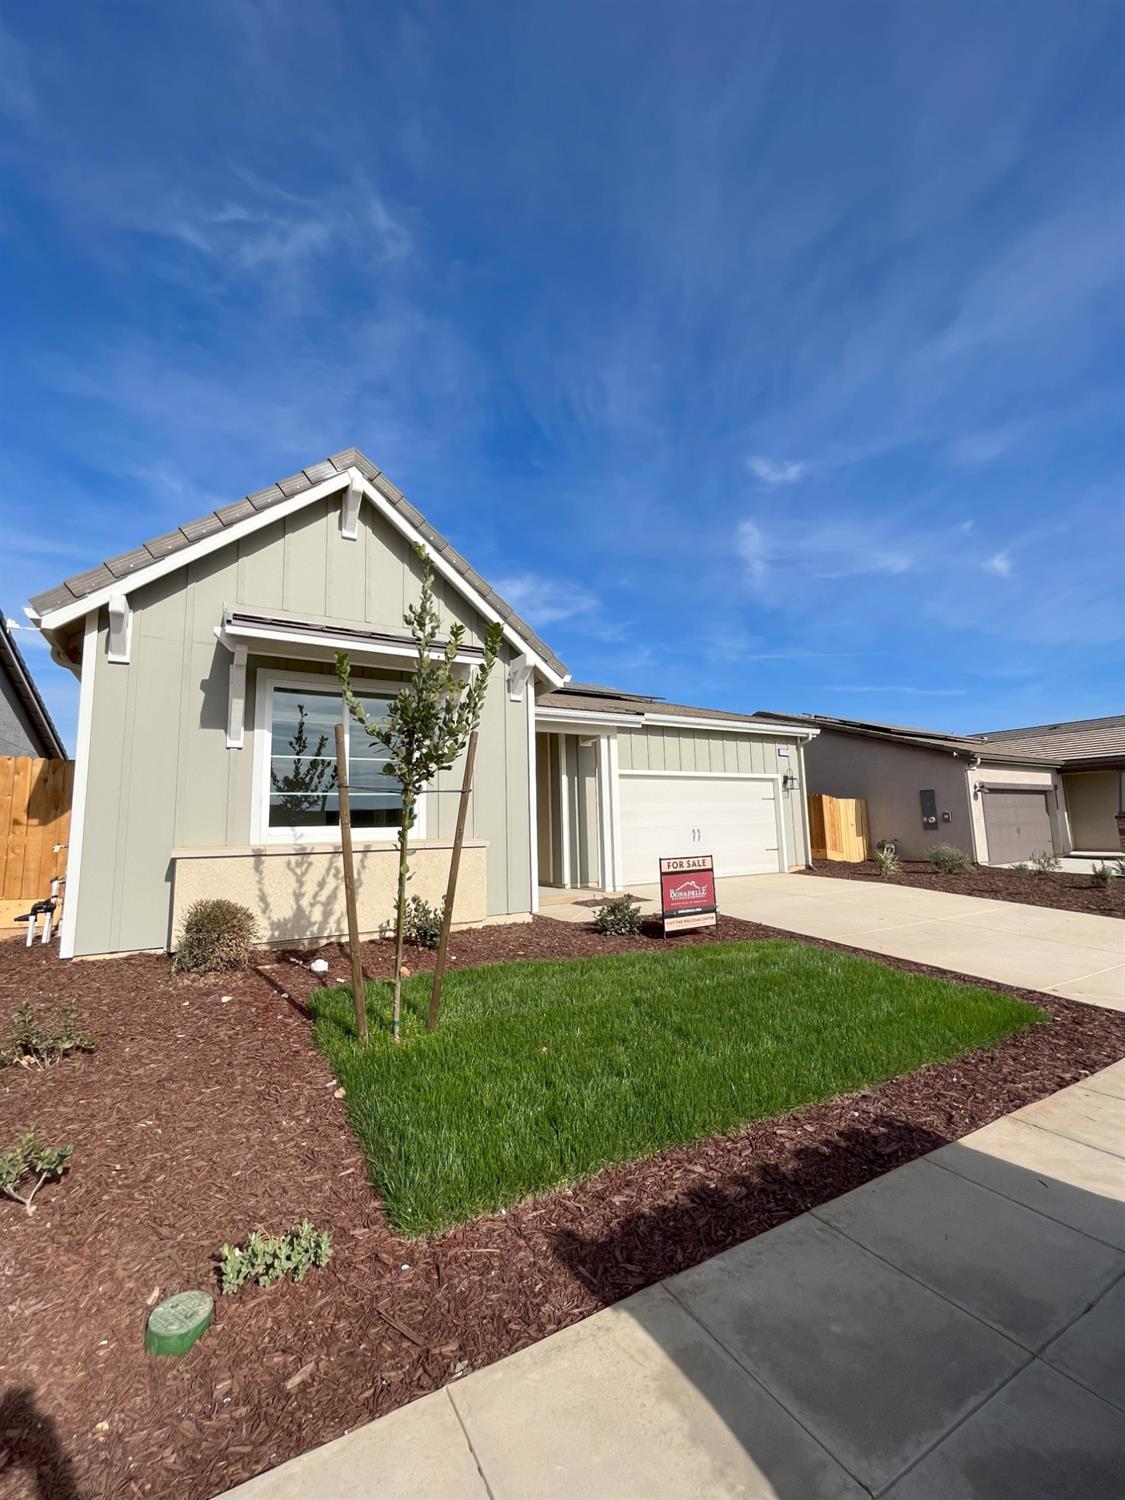 Photo of 1235 Peters Rd in Madera, CA